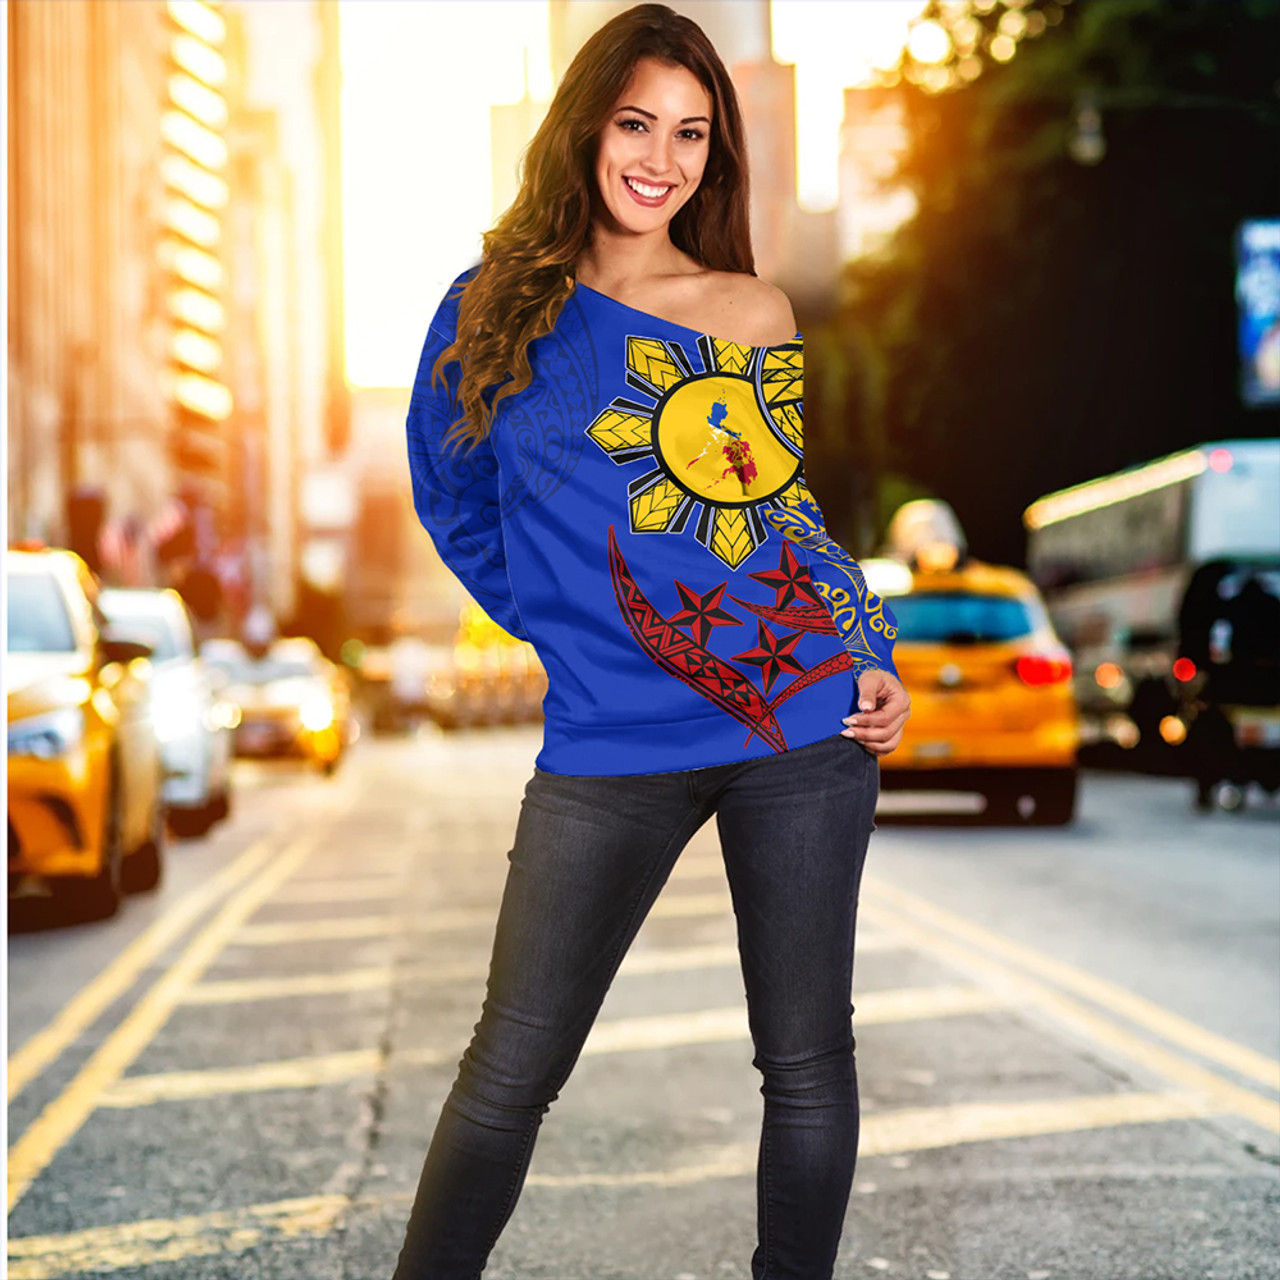 Philippines Off Shoulder Sweatshirt Tribal Sun In My Heart Color Flag Style